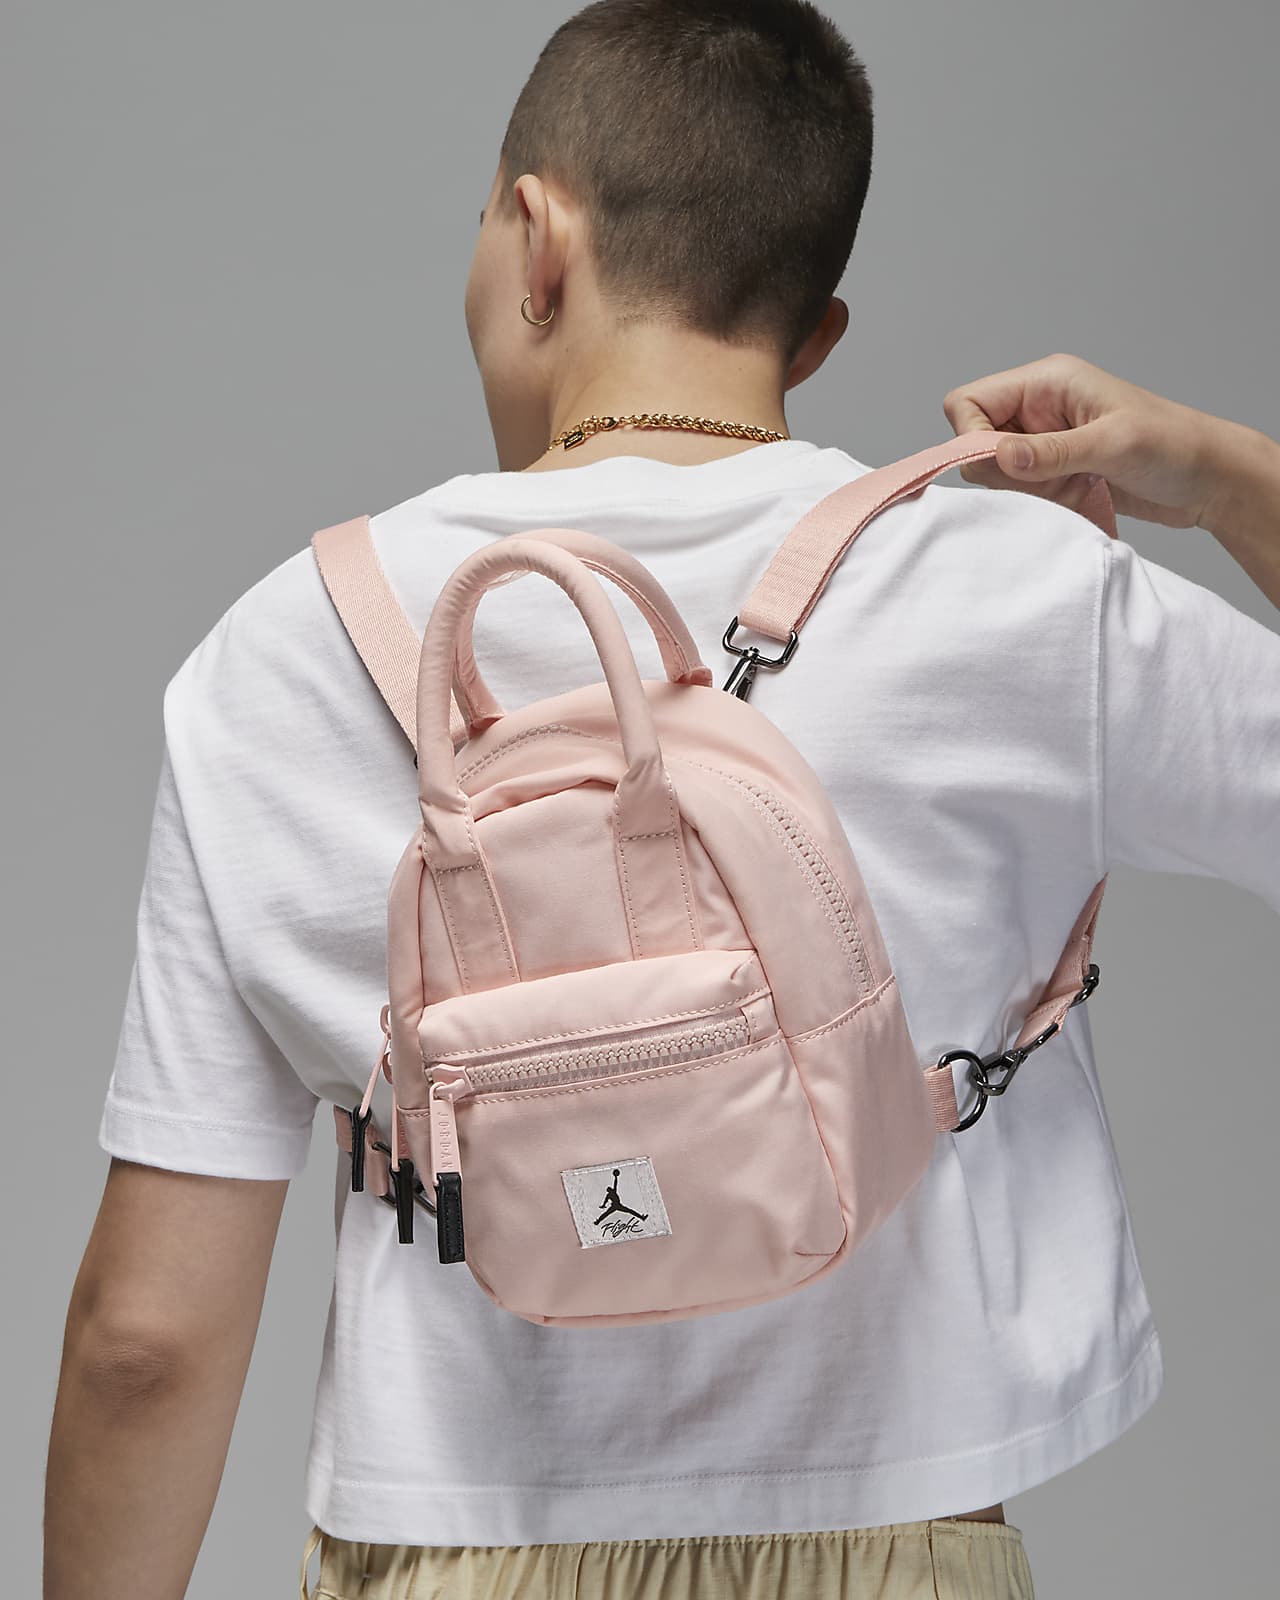 Bag Strap Pink - Best Price in Singapore - Oct 2023